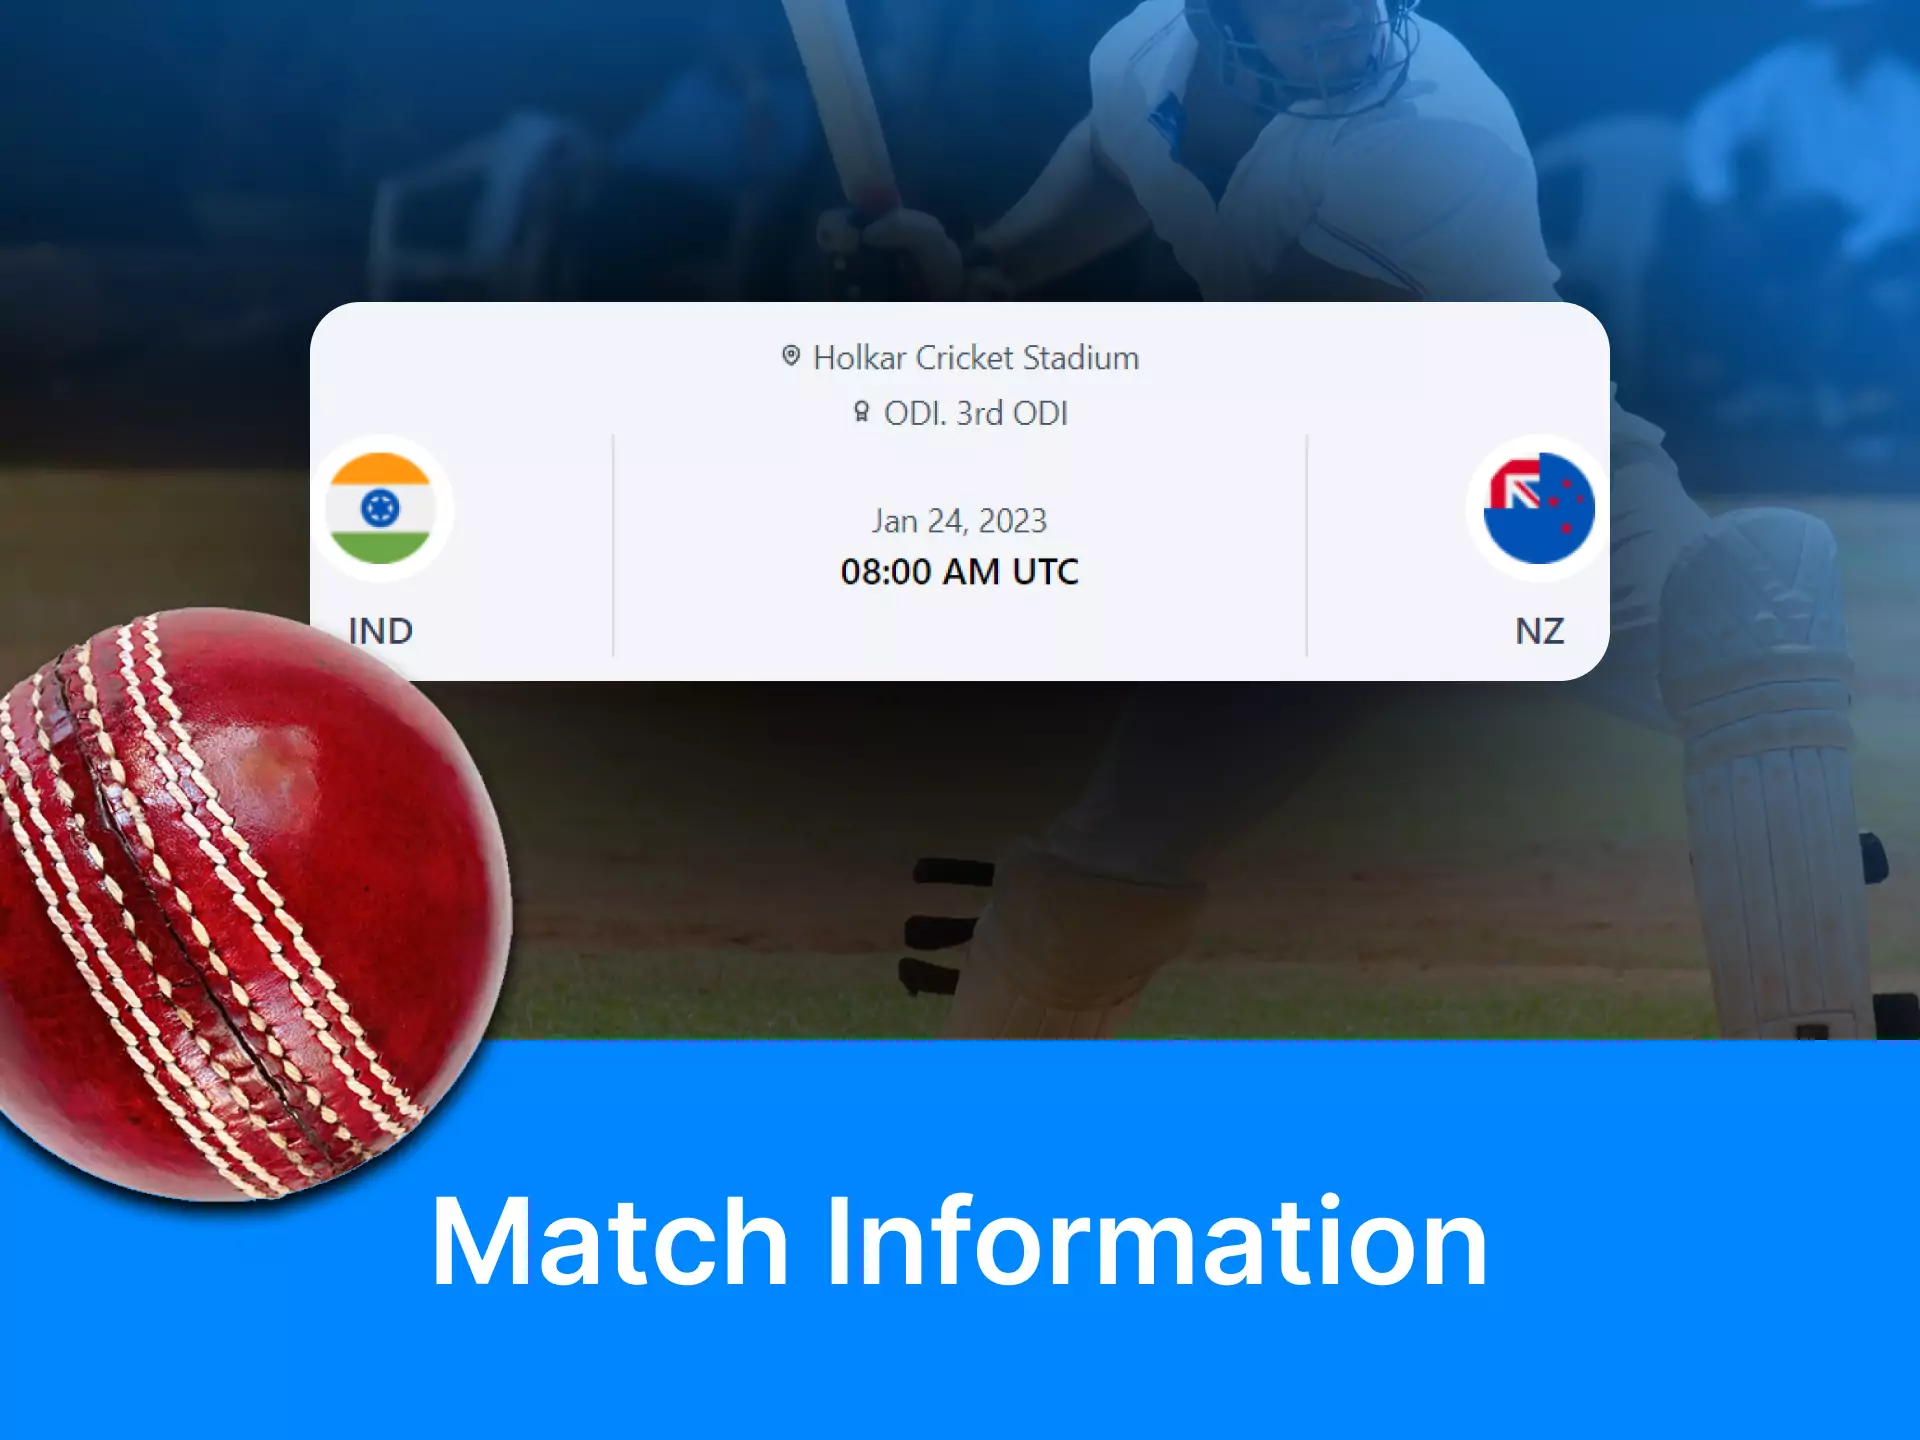 Any information about the upcoming match can affect the prediction.